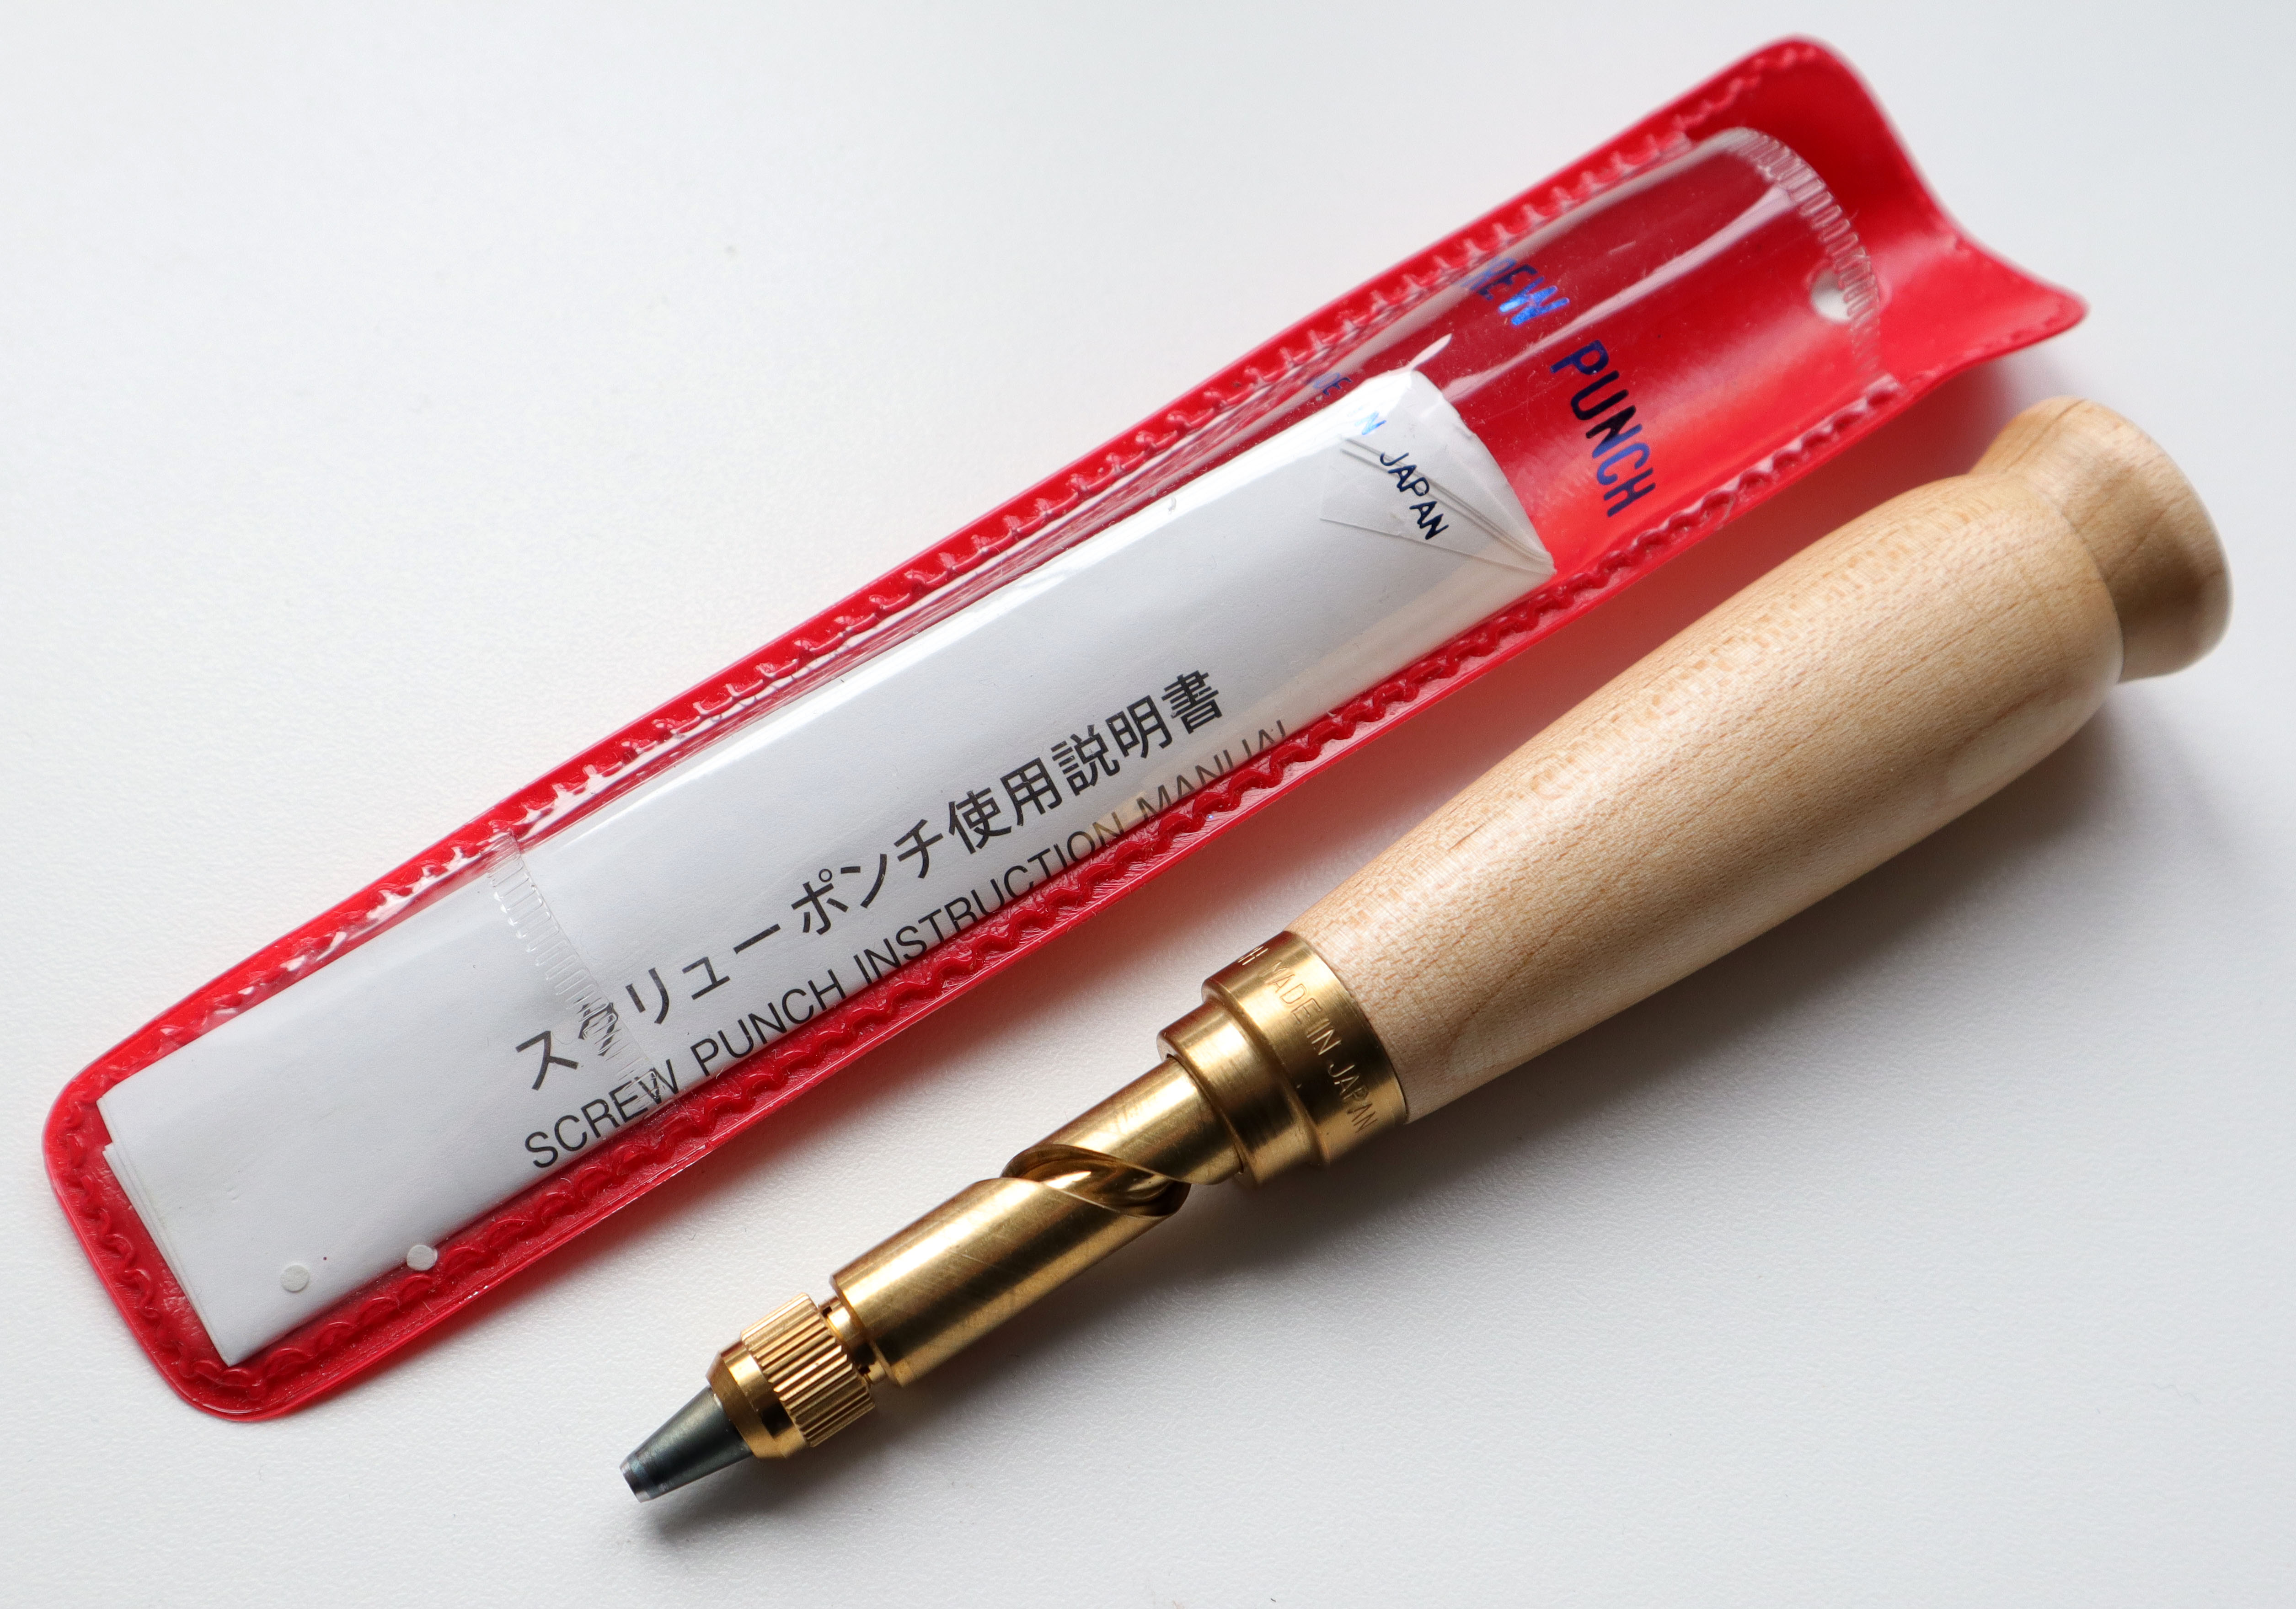 a japanese screw punch made in japan with red sleeve and instructions in japanese writing